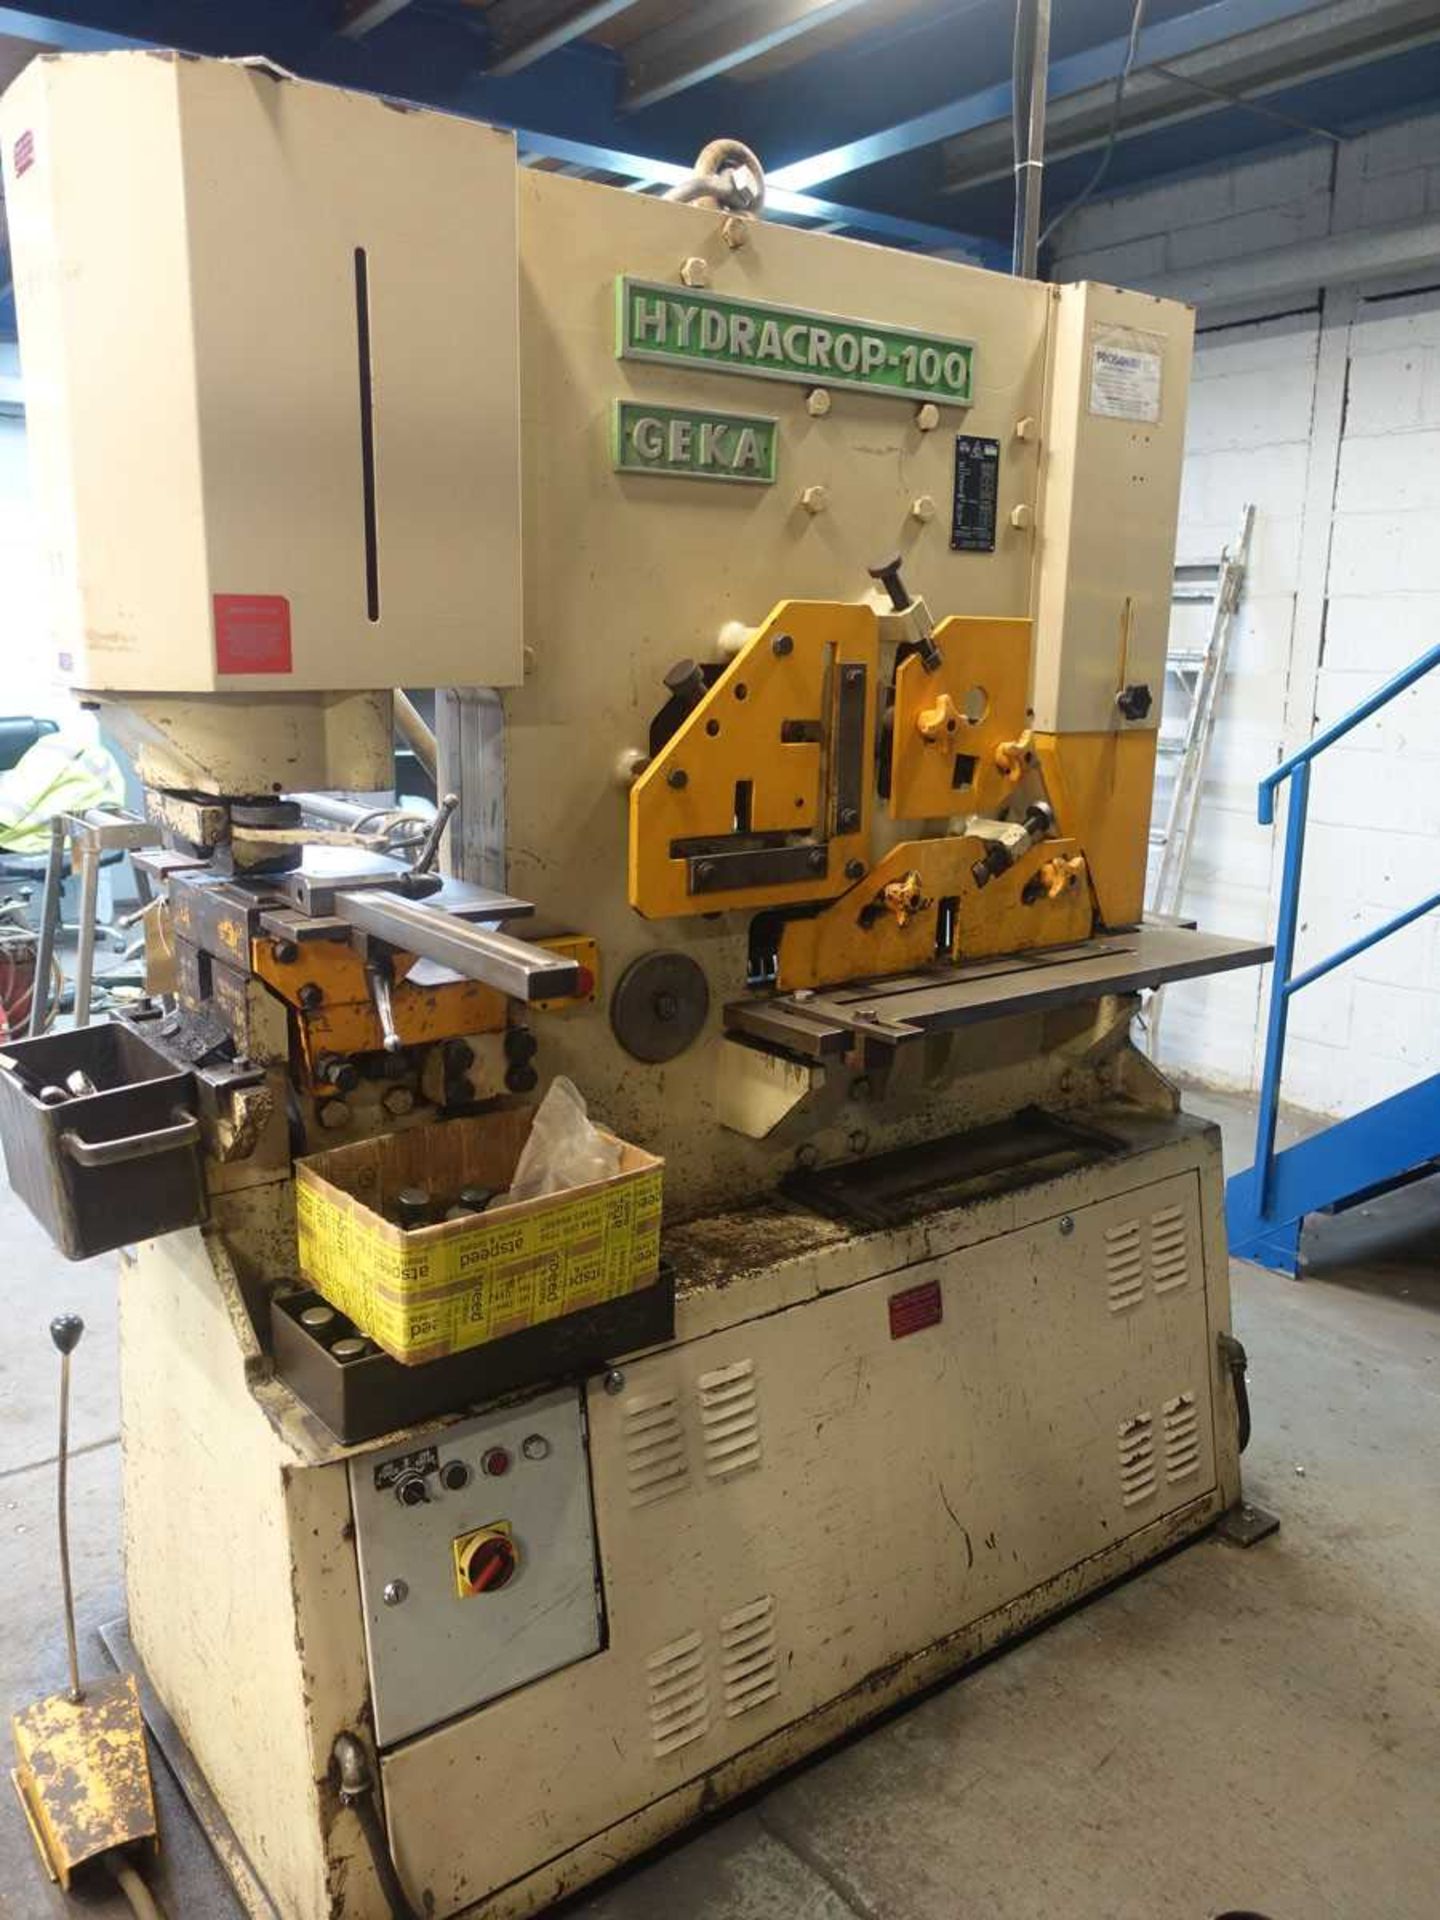 +VAT Geka Hydracrop model HYD-100 metalworker with some tooling Machine no: 13927 - Image 5 of 8